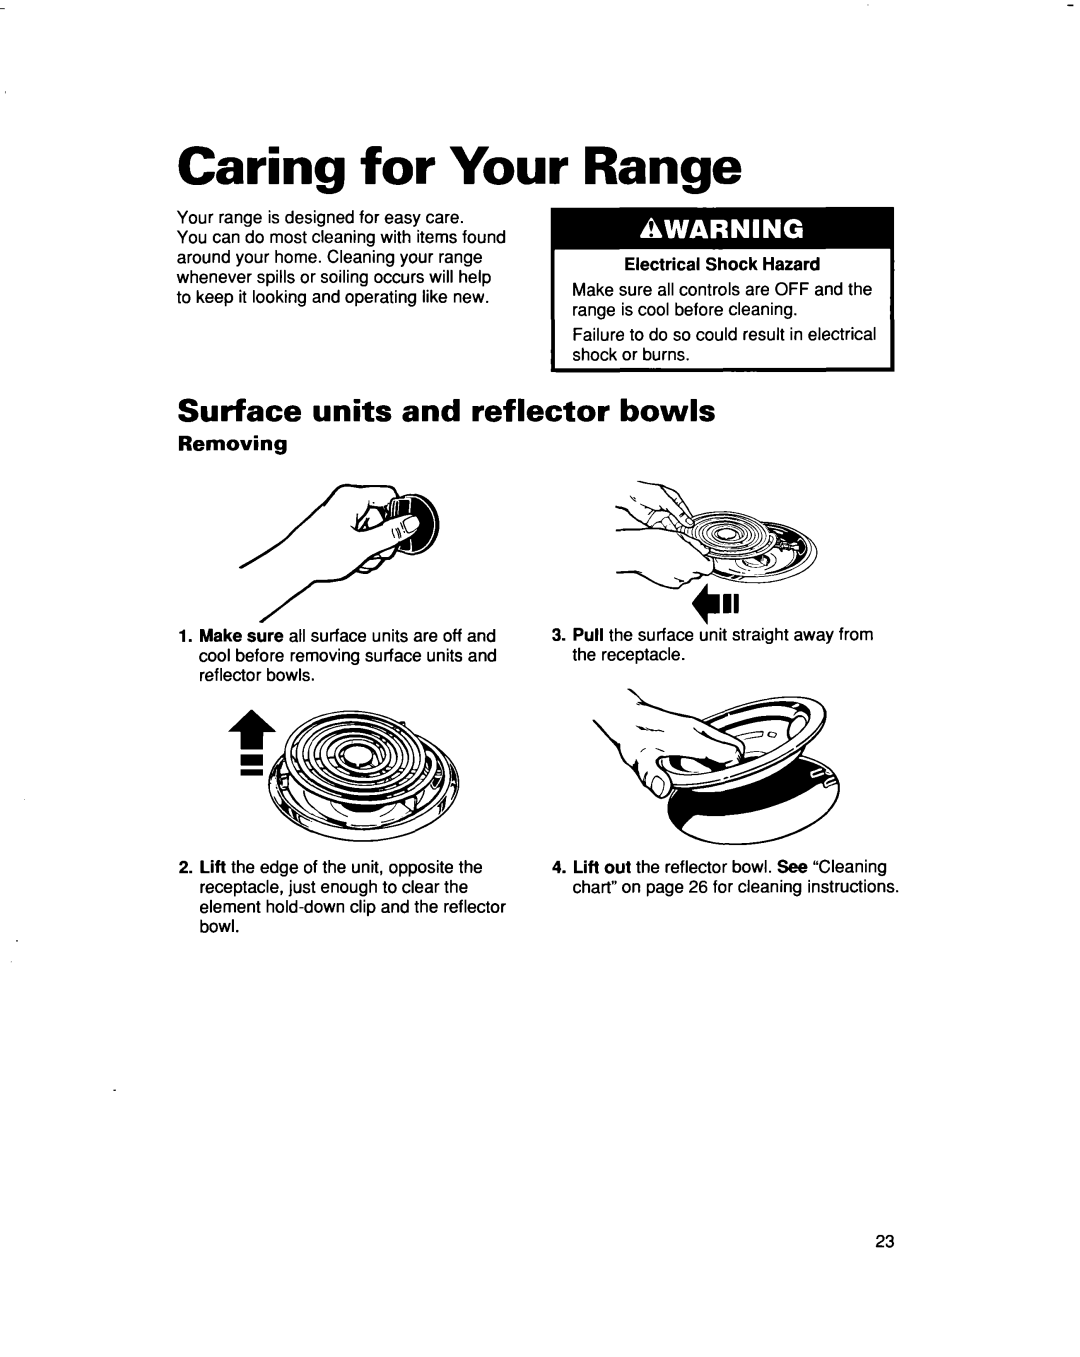 Whirlpool RF315PXD manual Caring for Your, Range, Surface units and reflector bowls, $ P, Electrical Shock Hazard 